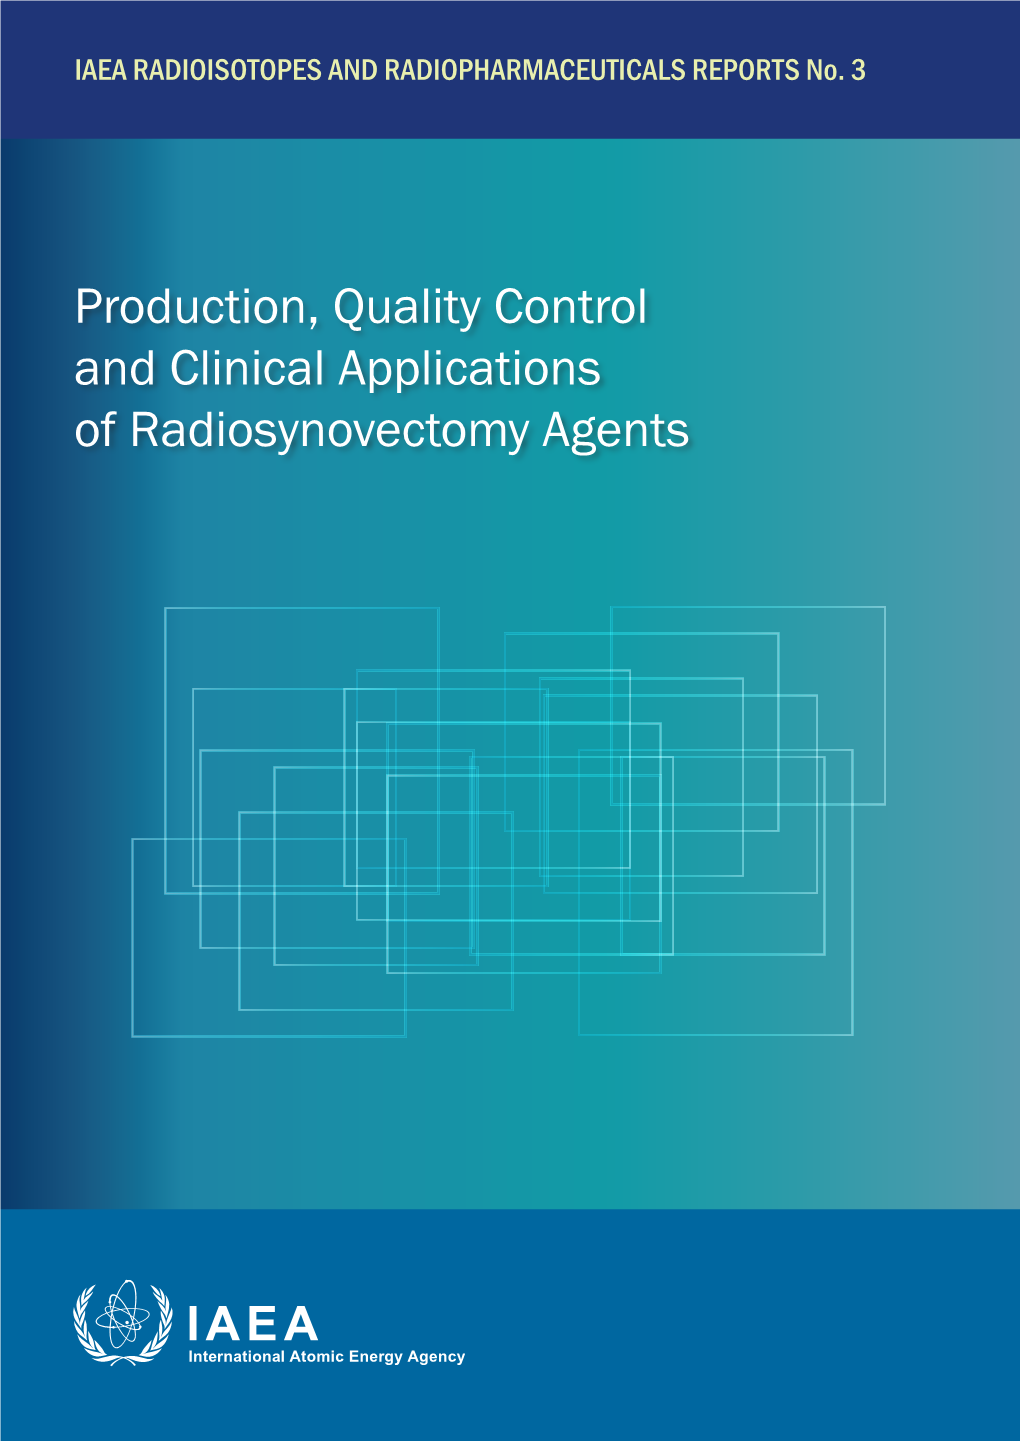 Cyclotron Produced Radionuclides: Guidelines for Setting up a Facility, Technical Reports Series No